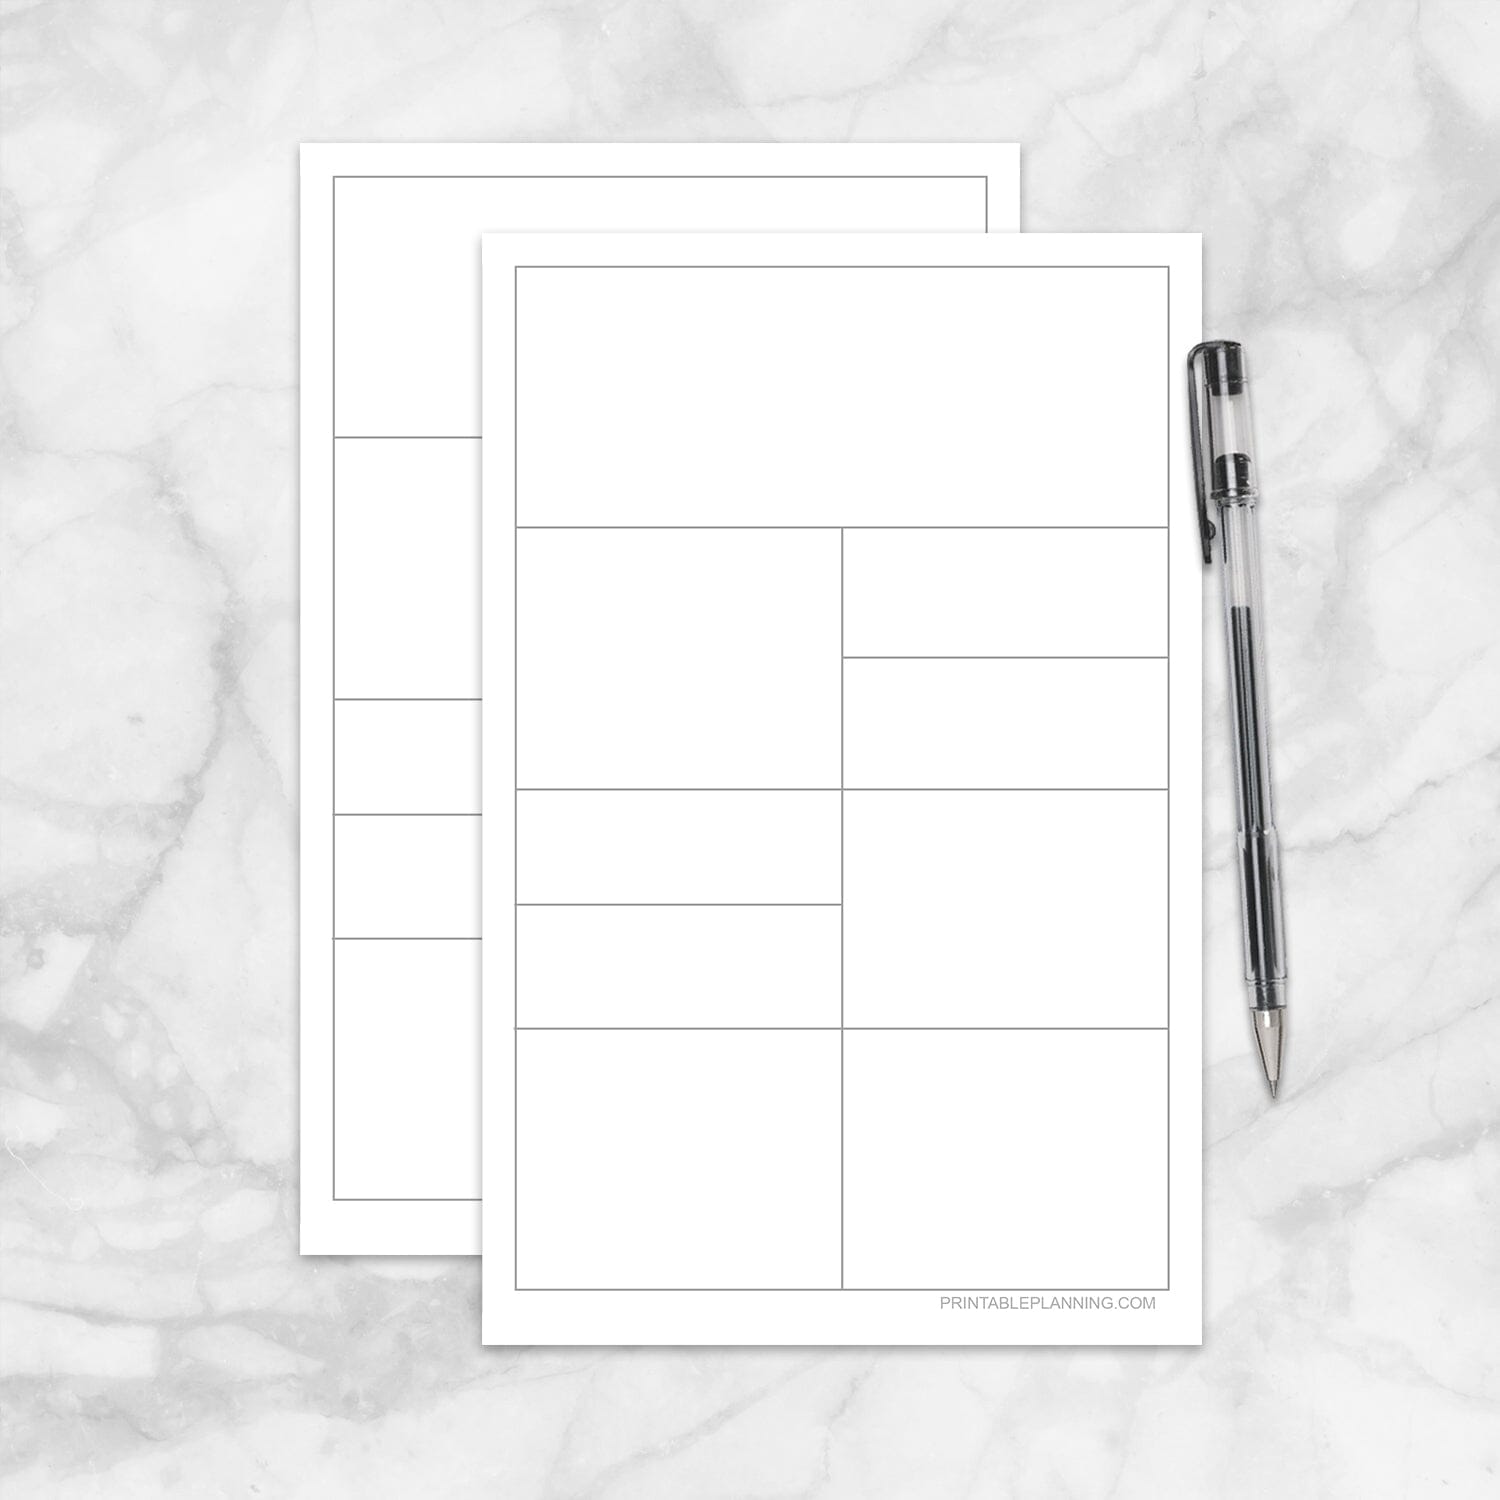 Printable Compartmentalized Scratch Paper - Half Page at Printable Planning. Example of half sized pages.